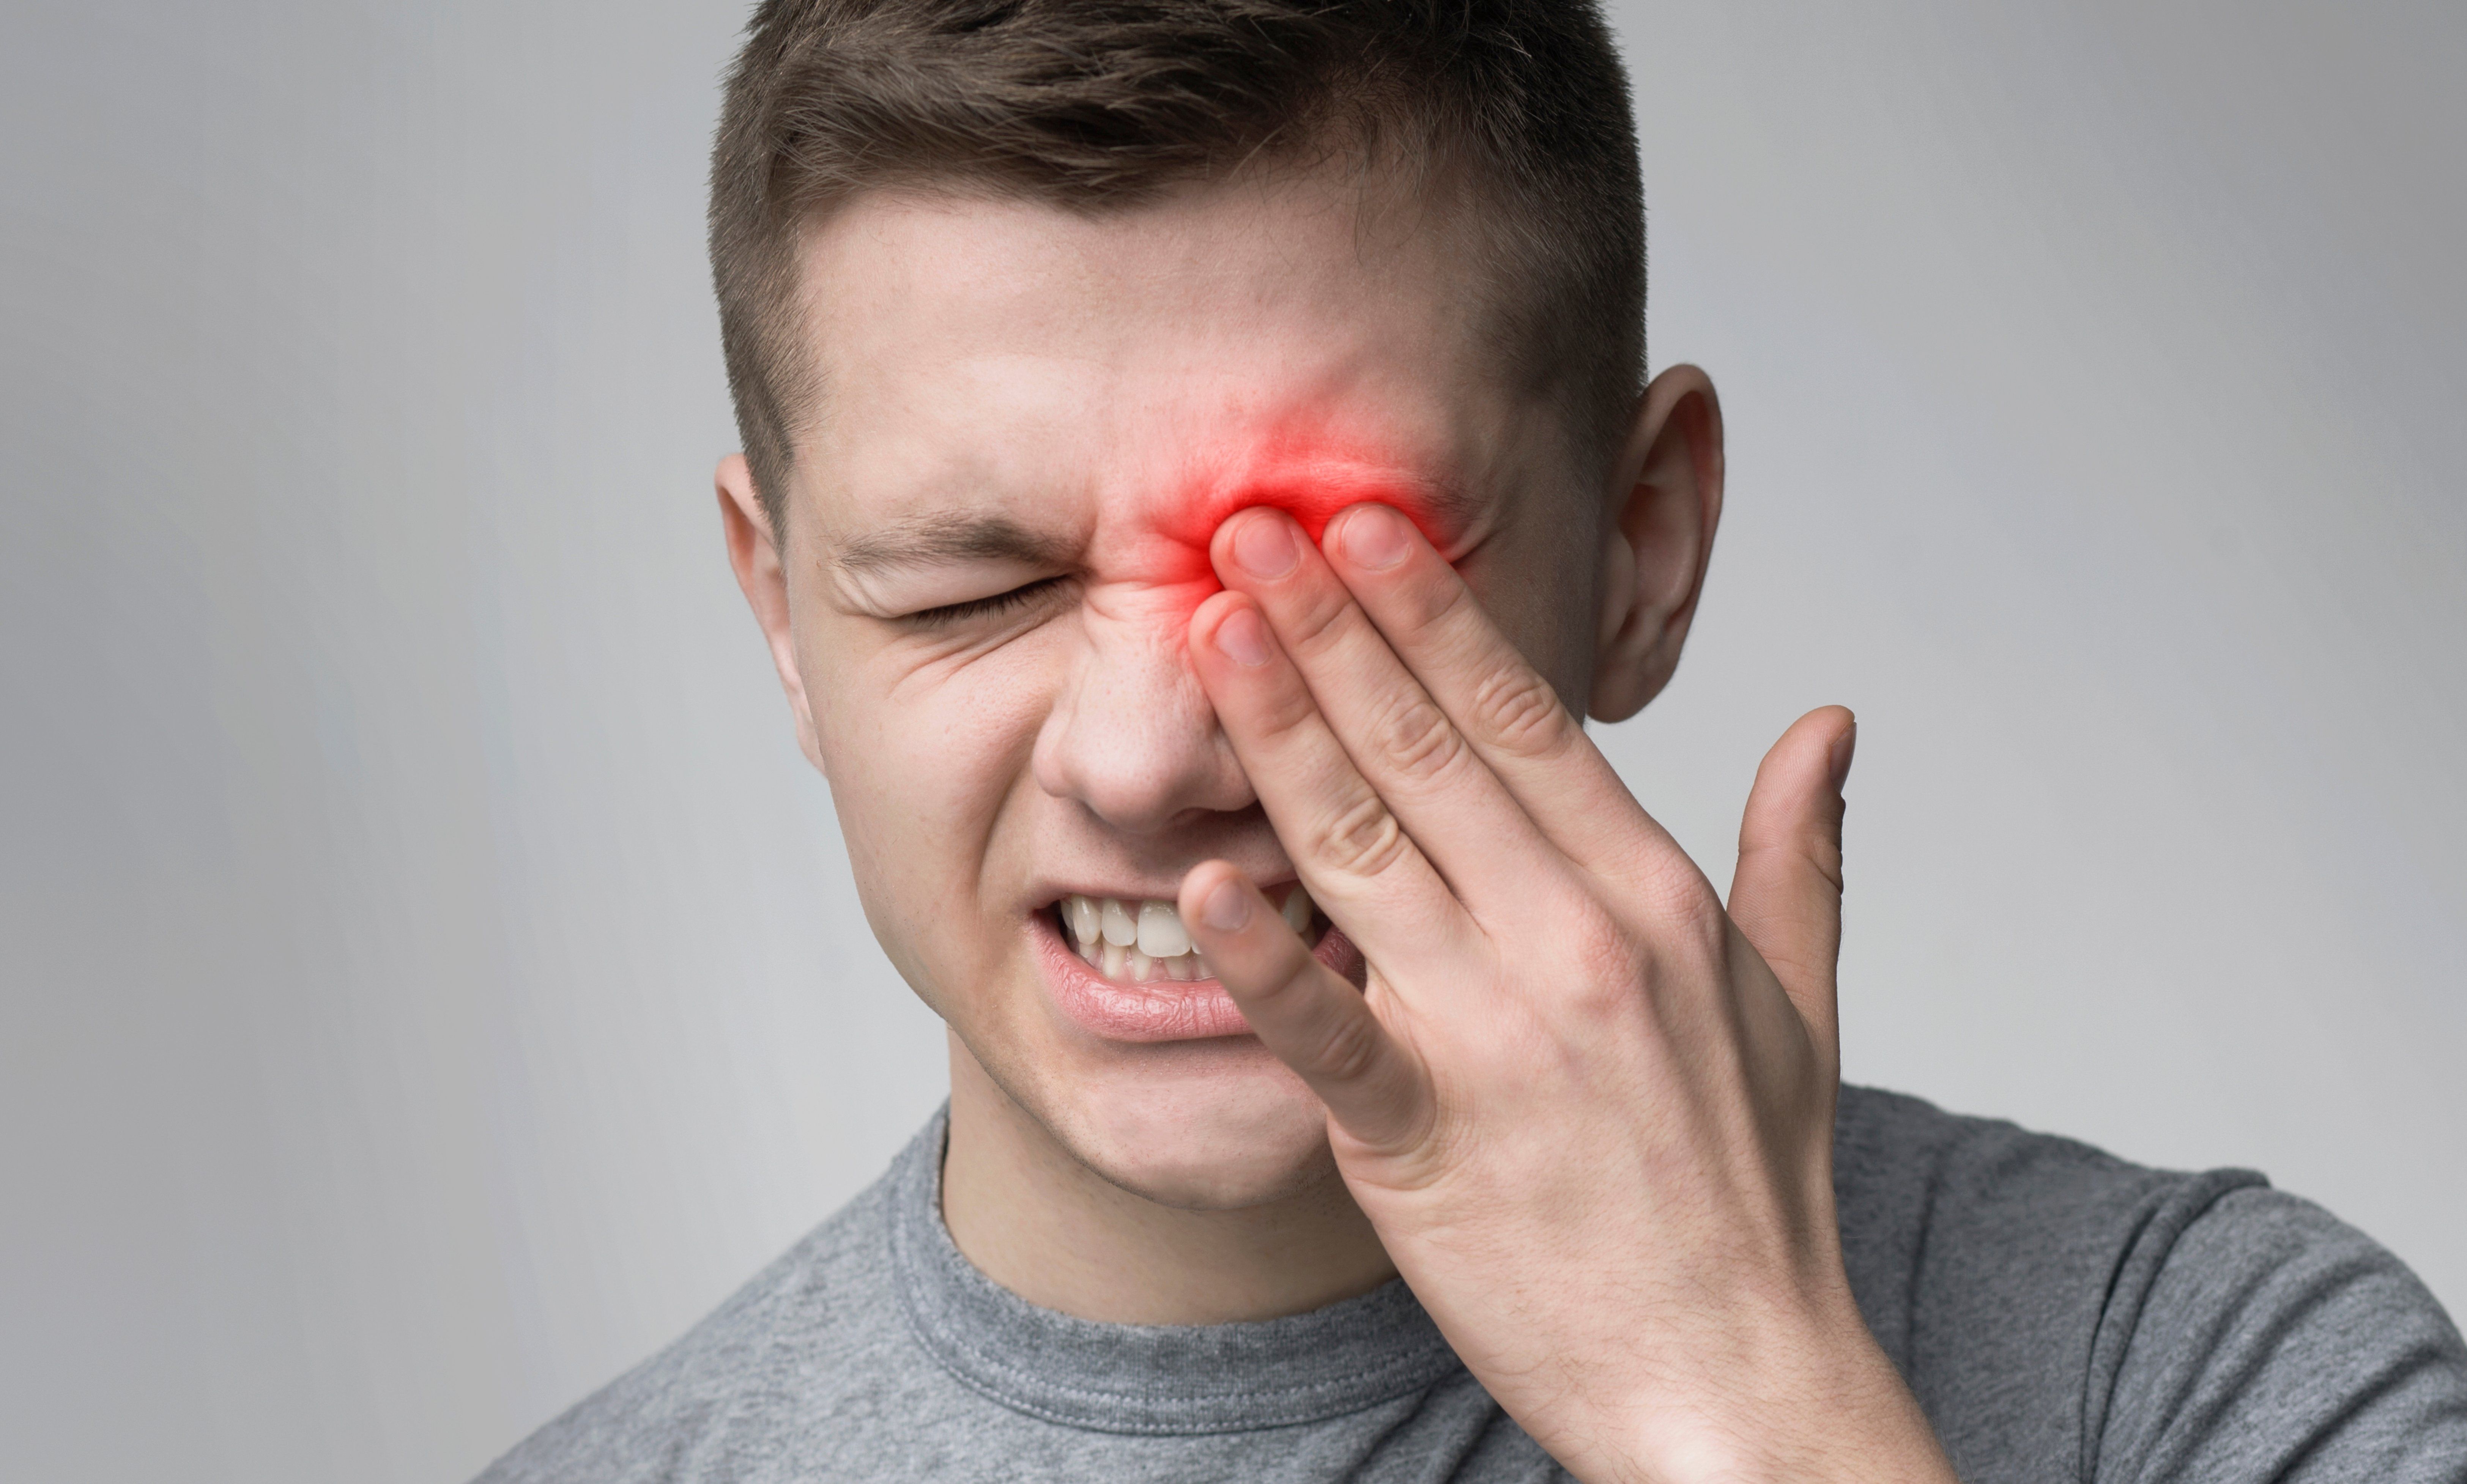 Common Eye Emergencies and How to Respond